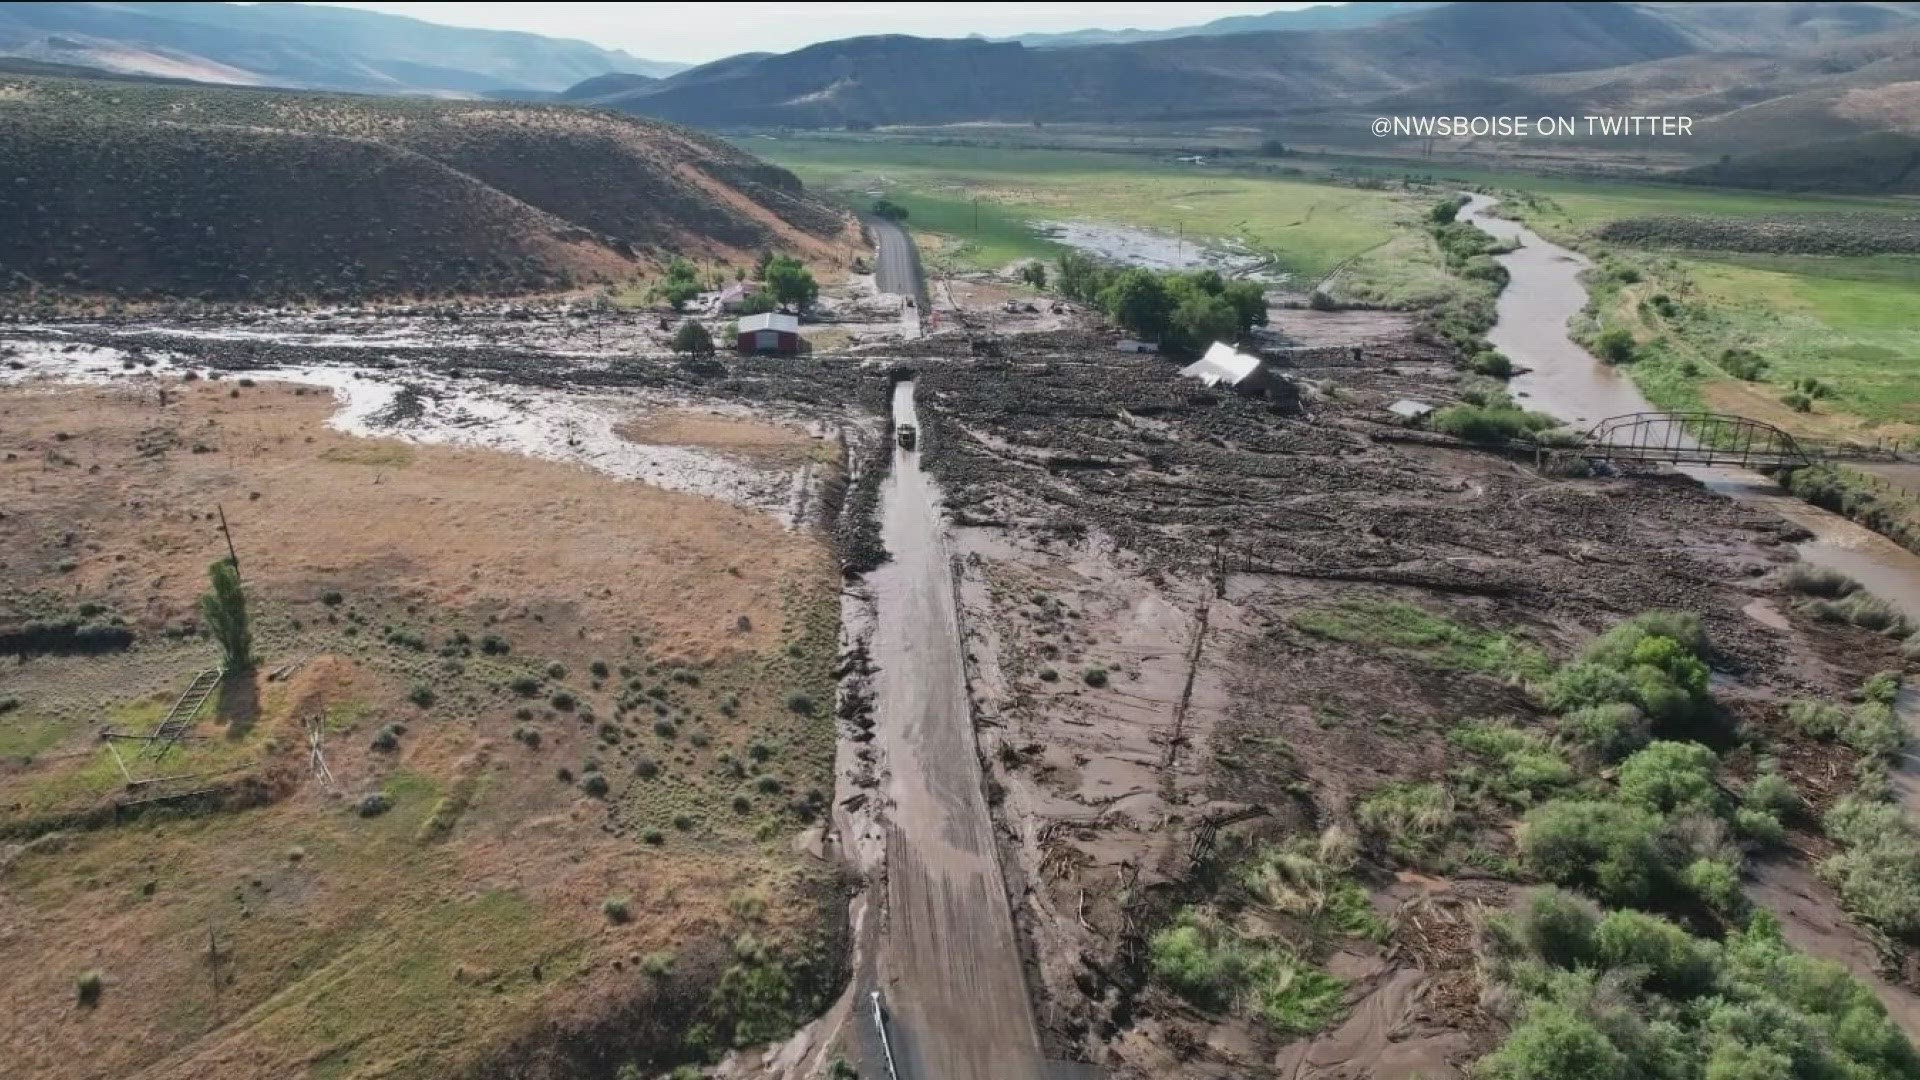 U.S Highway 20 in eastern Oregon has reopened to two-lane traffic with reduced speeds after debris slides prompted a closure late Sunday night.